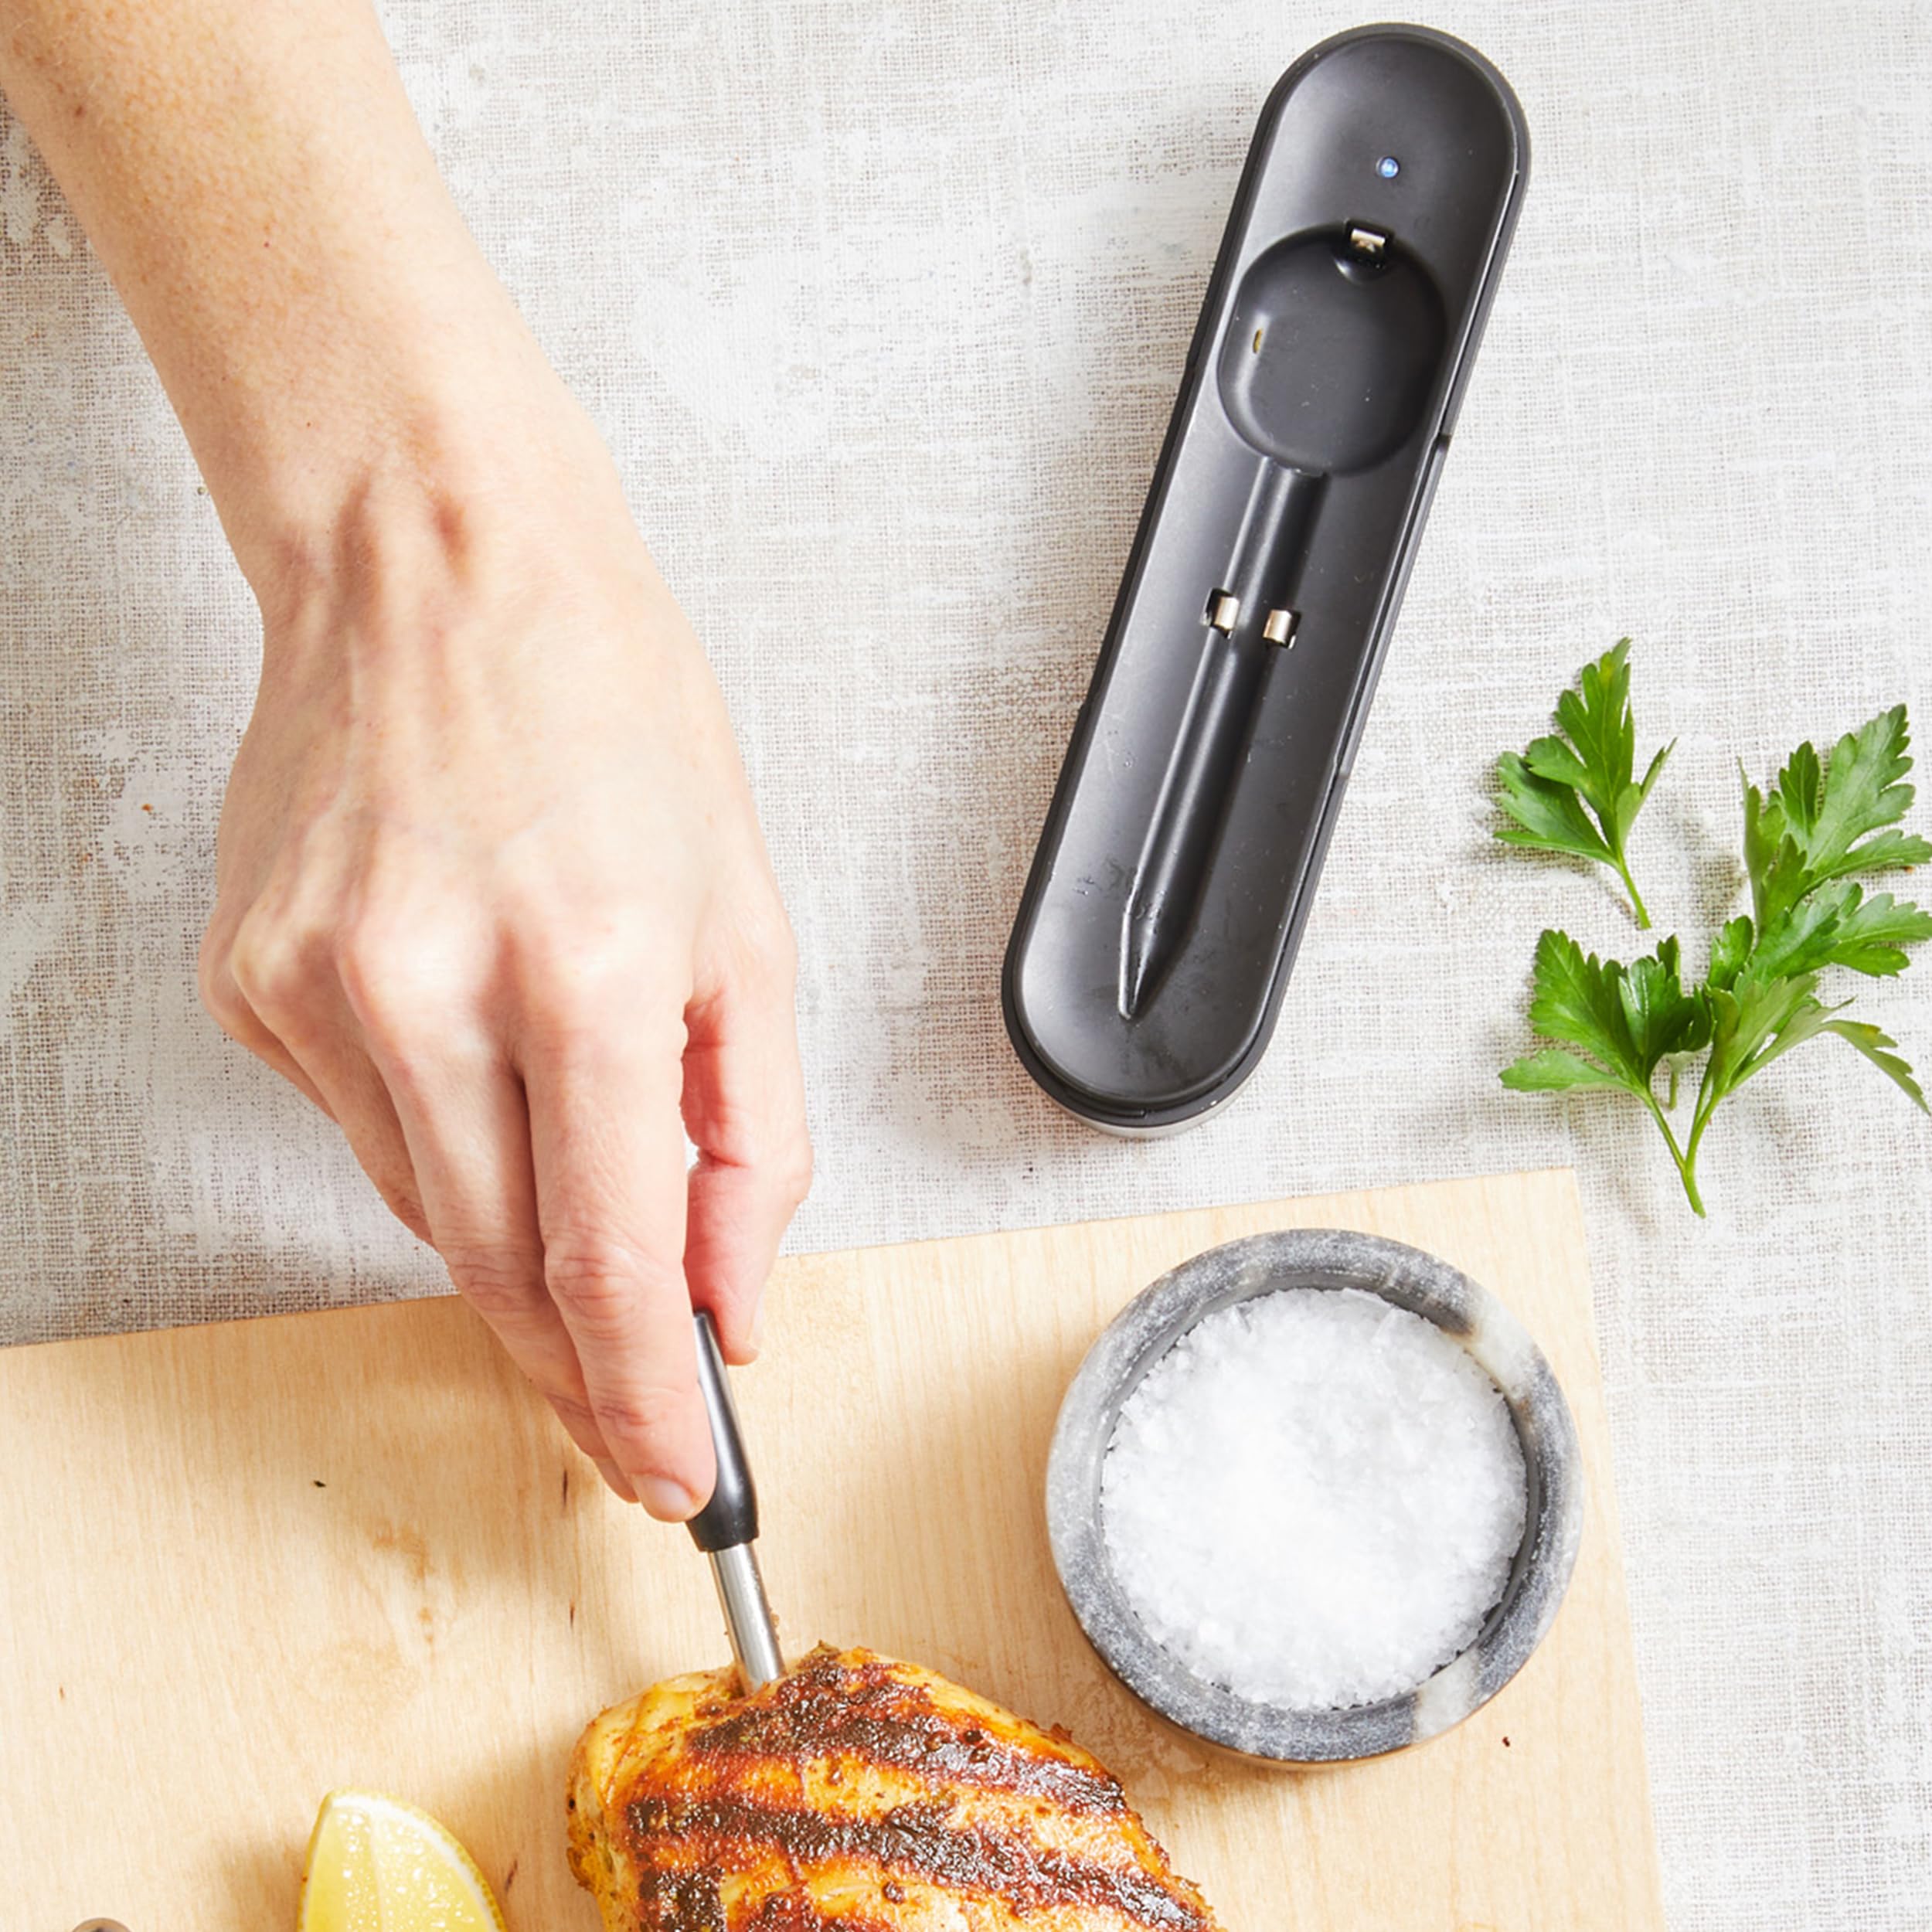 KitchenAid Yummly Smart Meat Thermometer with Wireless Bluetooth Connectivity, 43 Hour Battery, 165 ft Range & Range Extender, $65.78